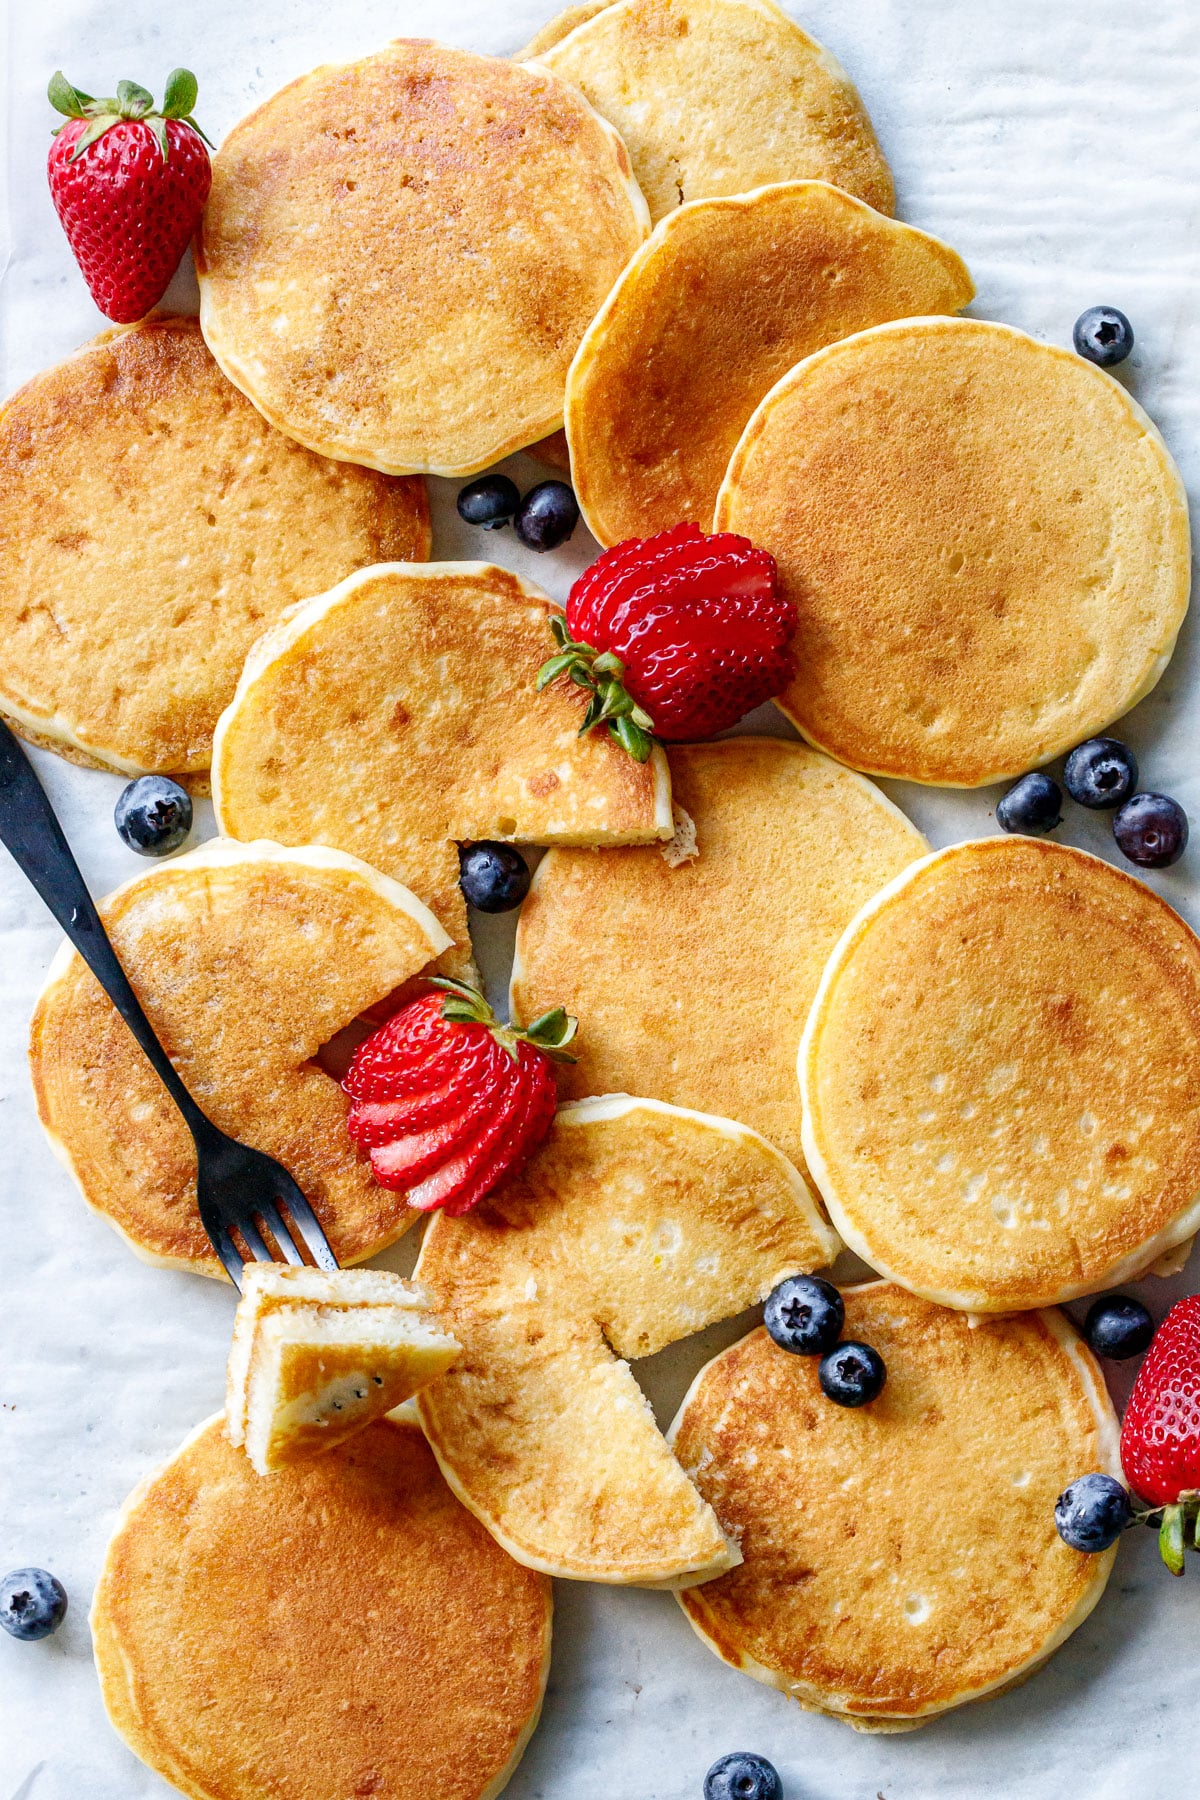 Overhead, scattered arrangement of Olive Oil Pancakes, some cut and some whole, with blueberries and strawberries.